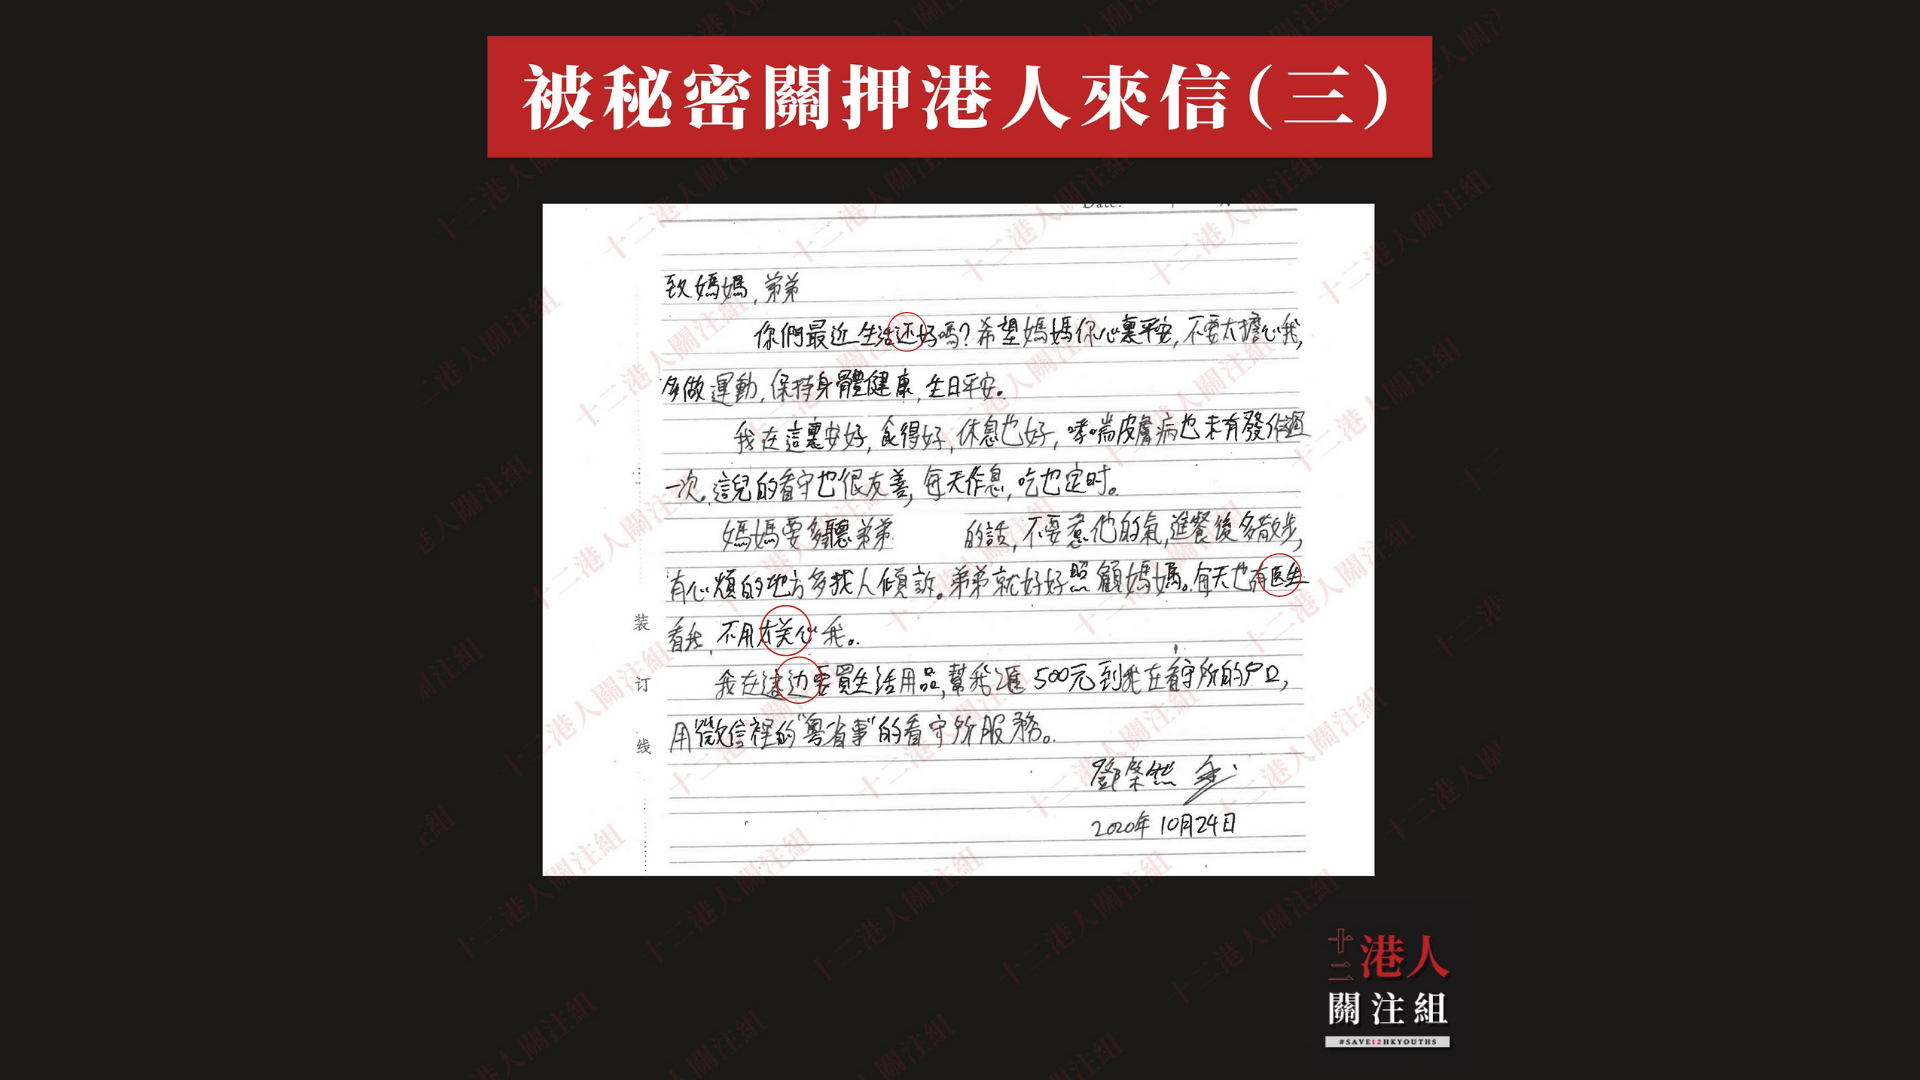 The letters, some of which include simplified Chinese characters (circled), paint an all-too-rosy picture of the conditions in the mainland Chinese detention center. Photo via Facebook/Save 12 Hong Kong Youths